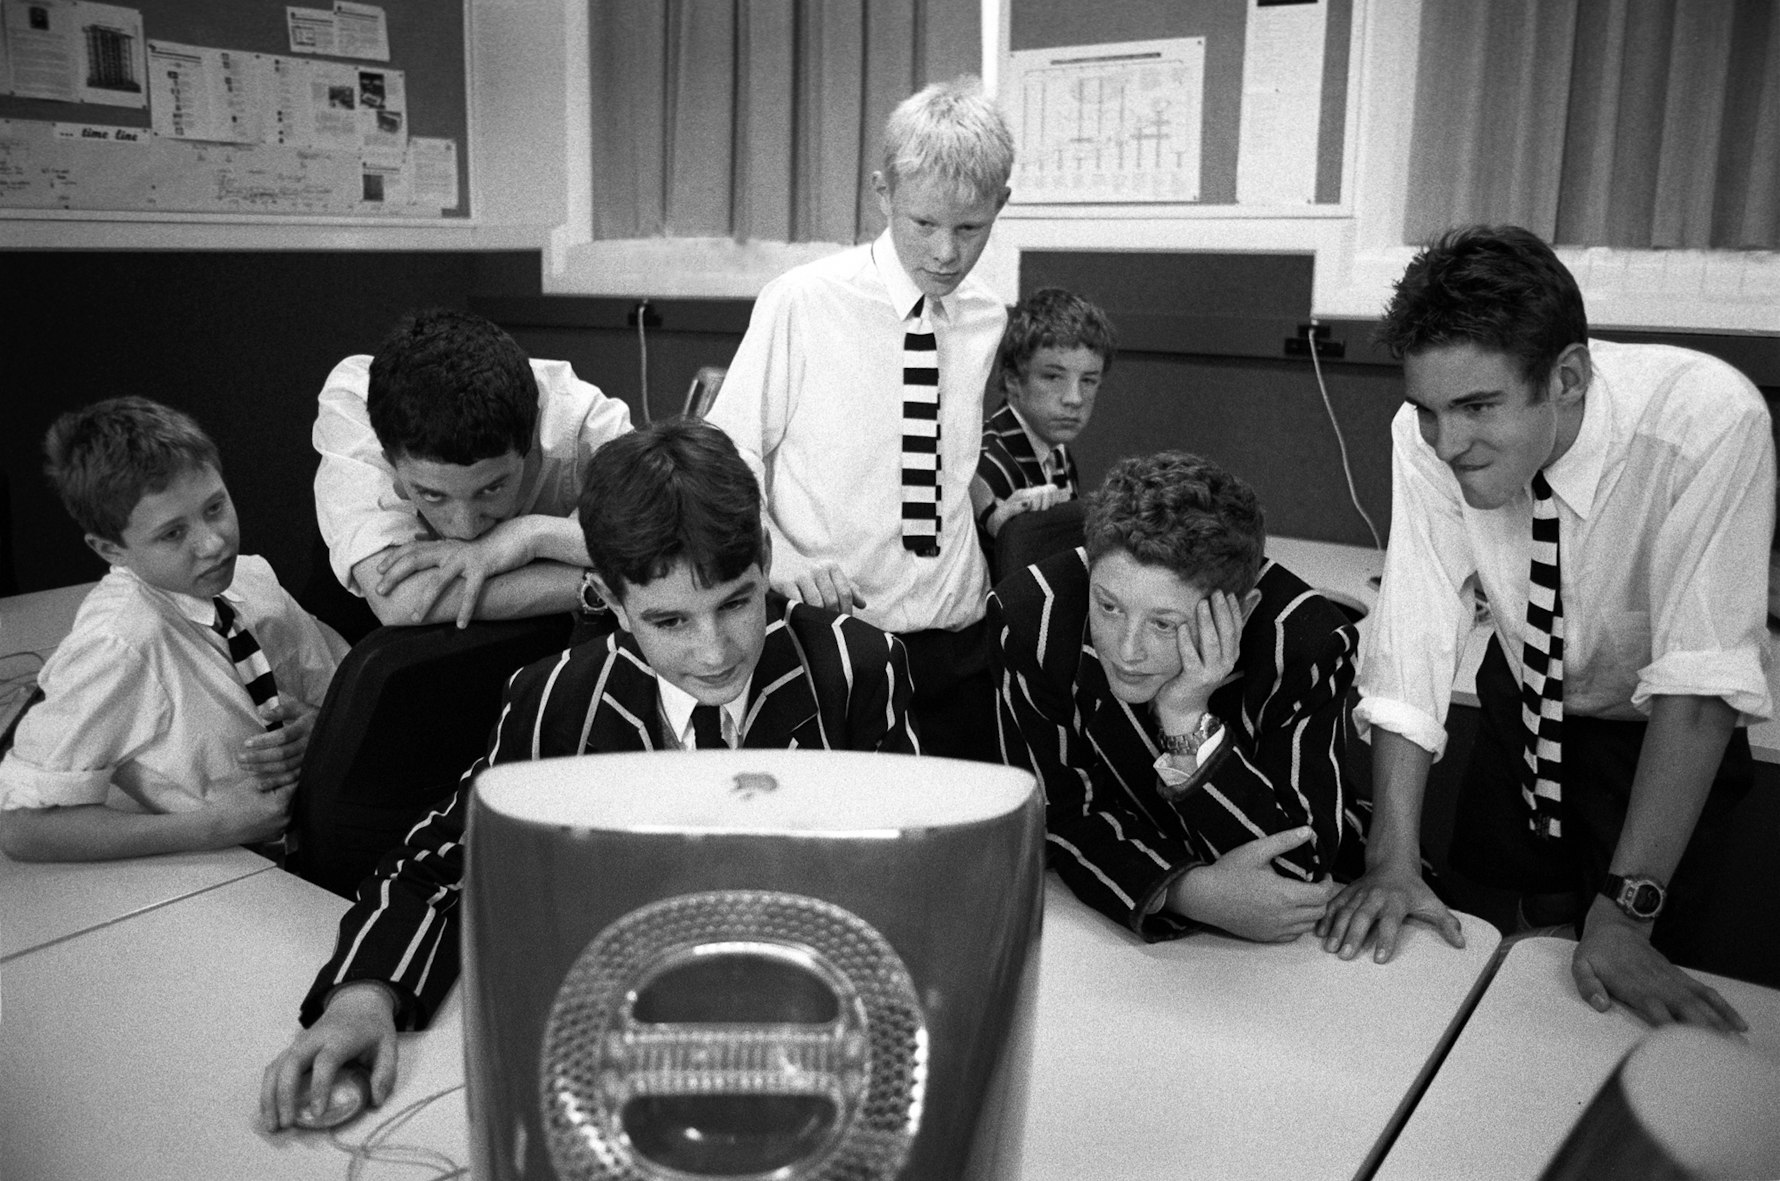 Students, classroom, Christ's College